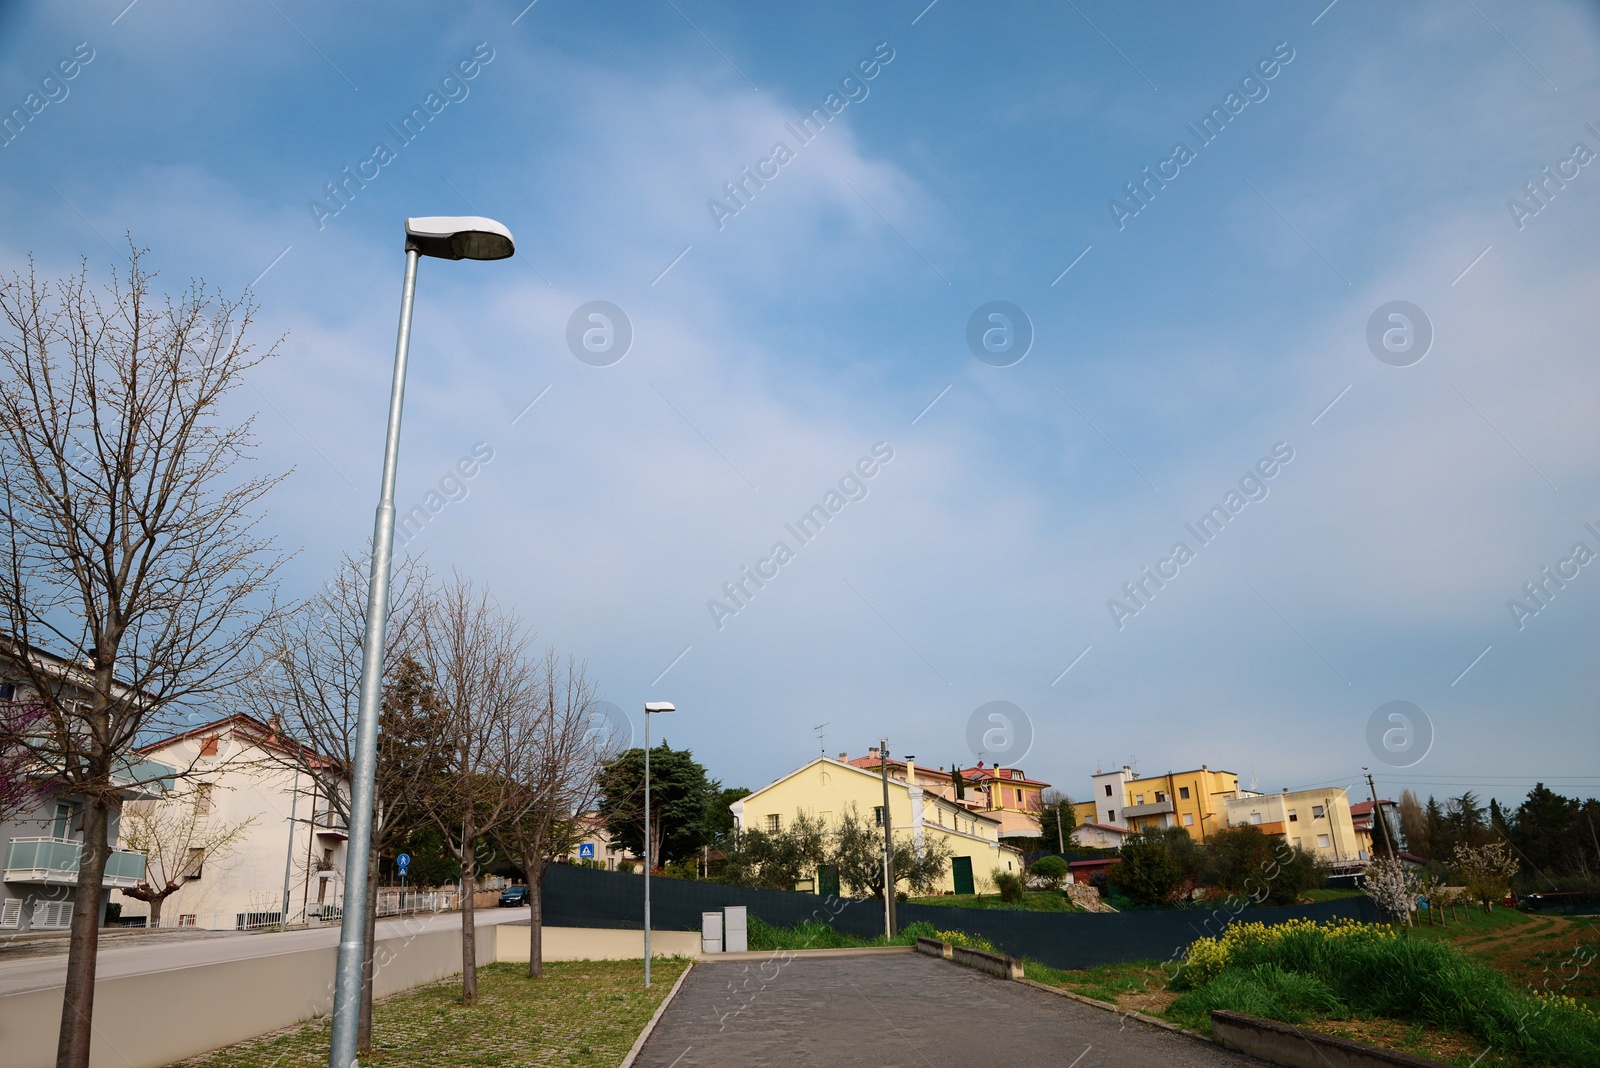 Photo of Picturesque view of beautiful city with street lamps and buildings